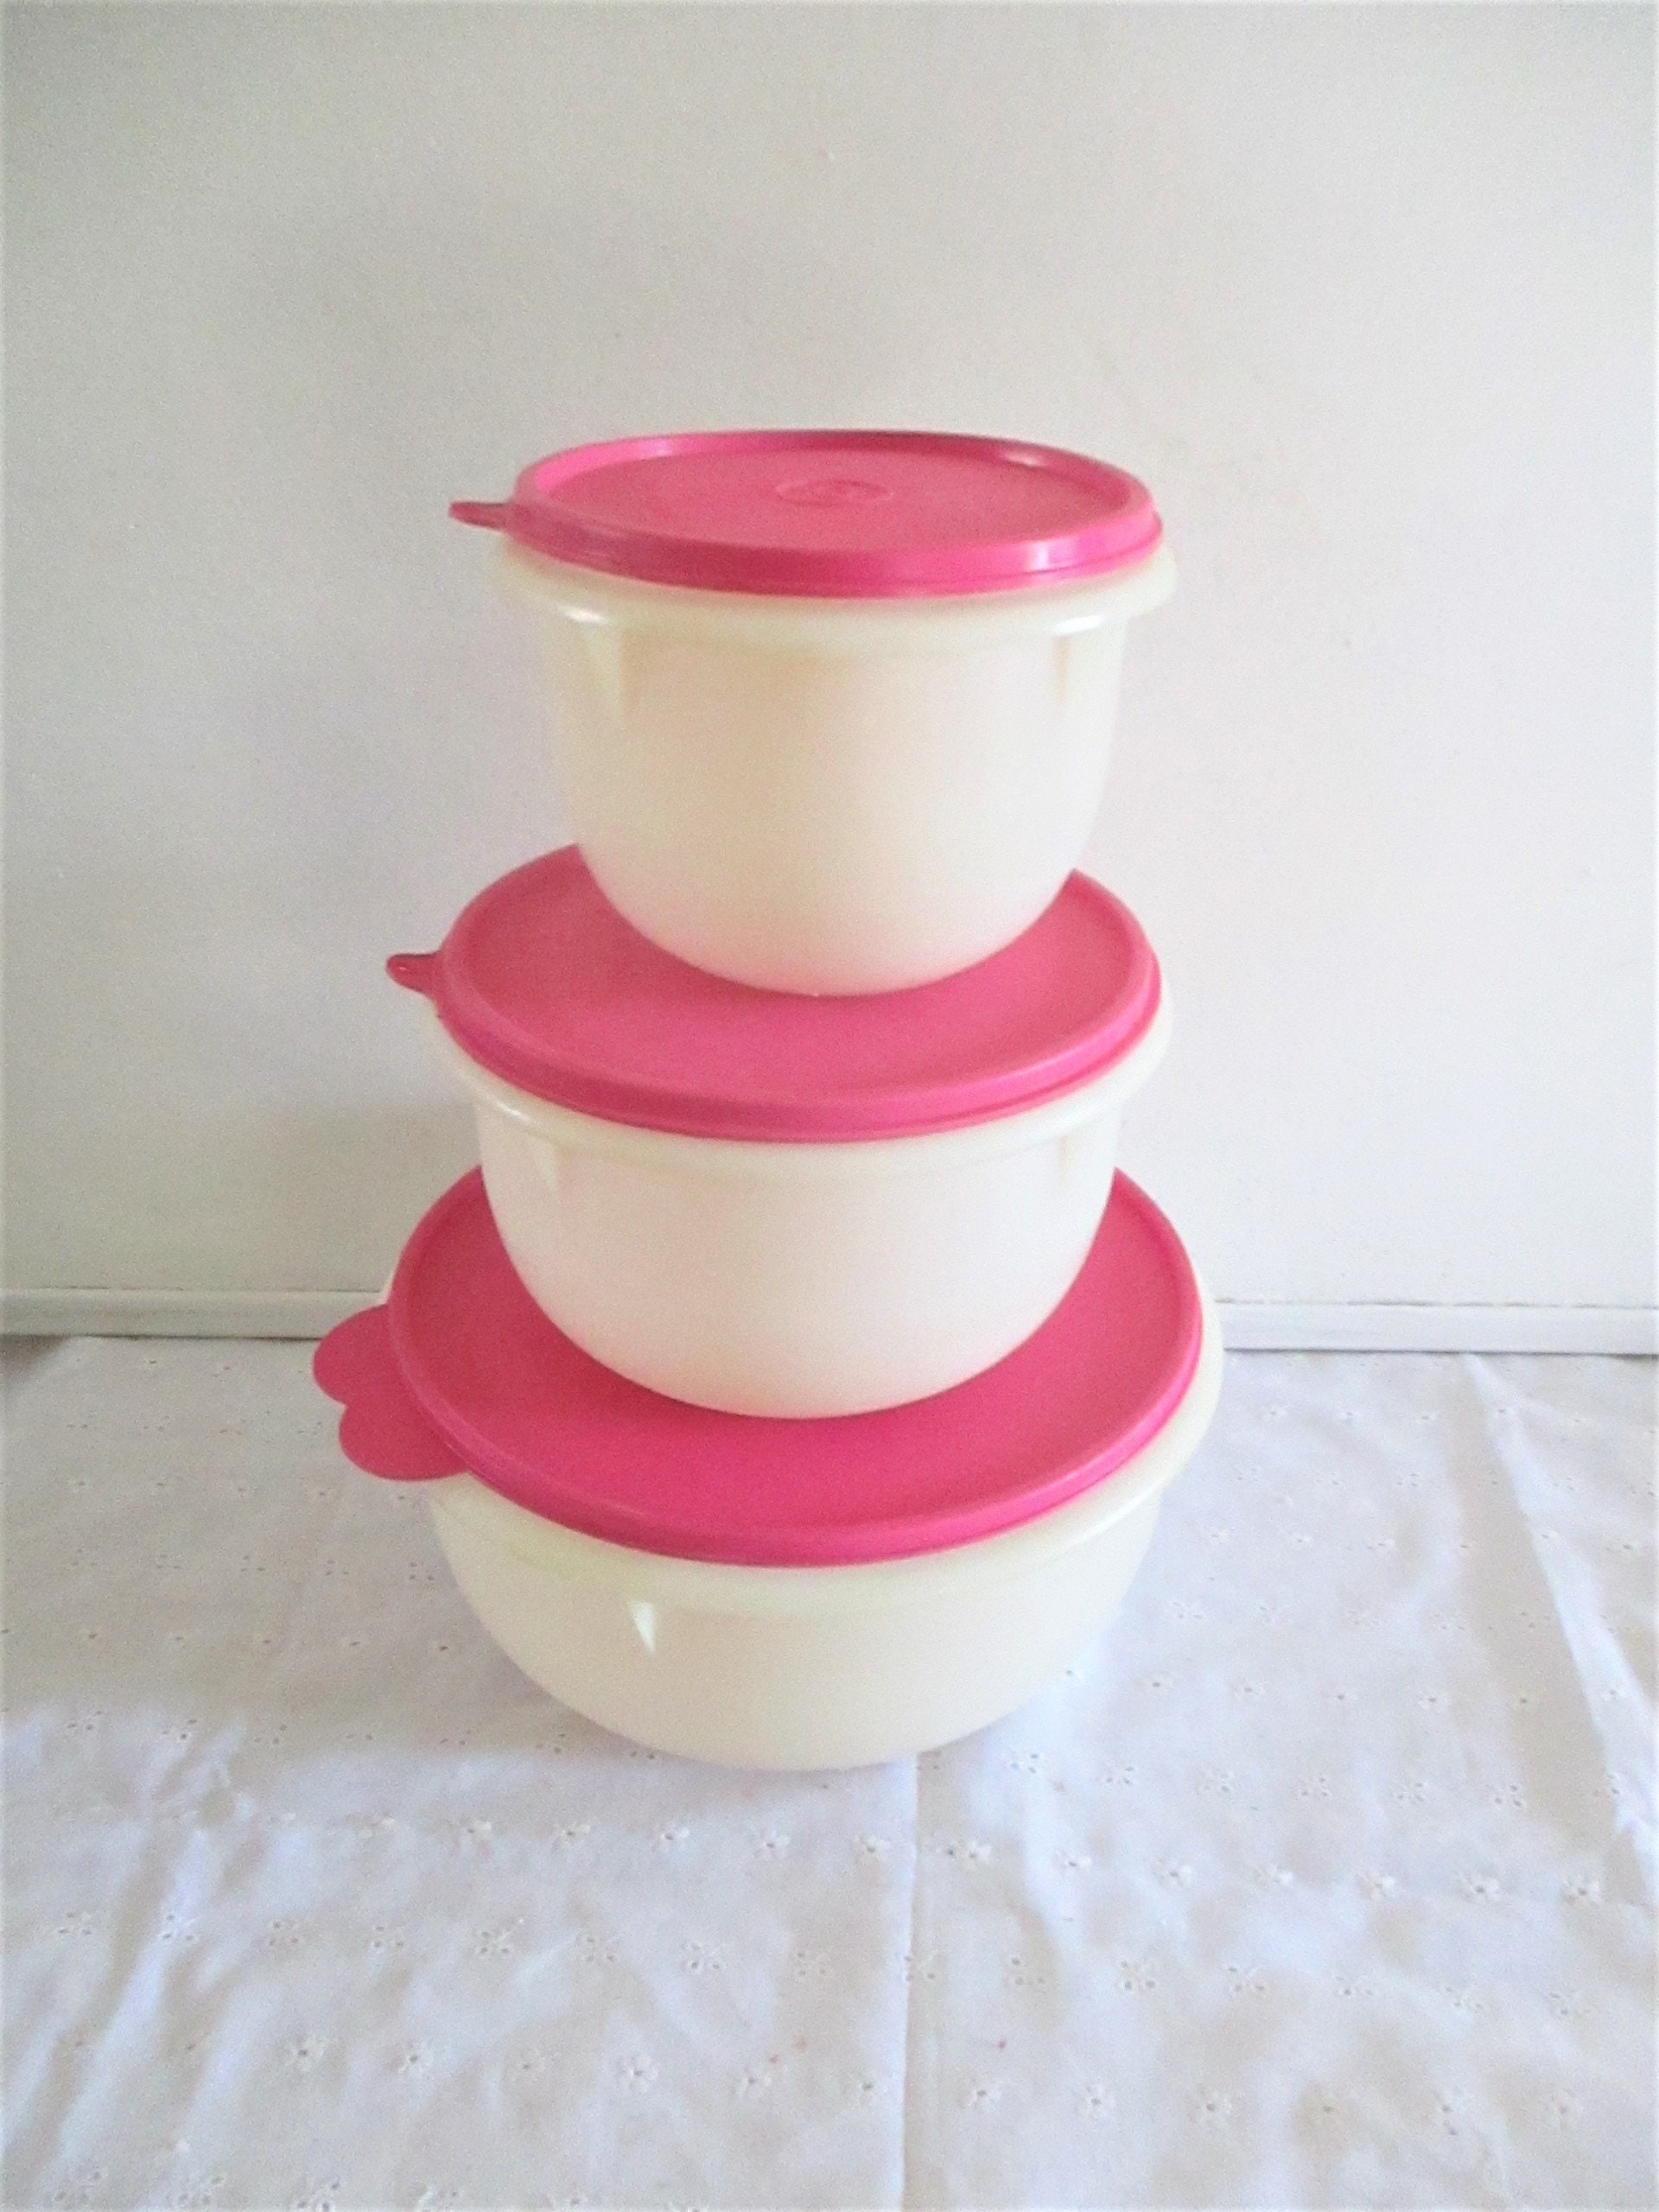 Tupperware Large That’s a Bowl 32cup Pink Kitchen food storage container